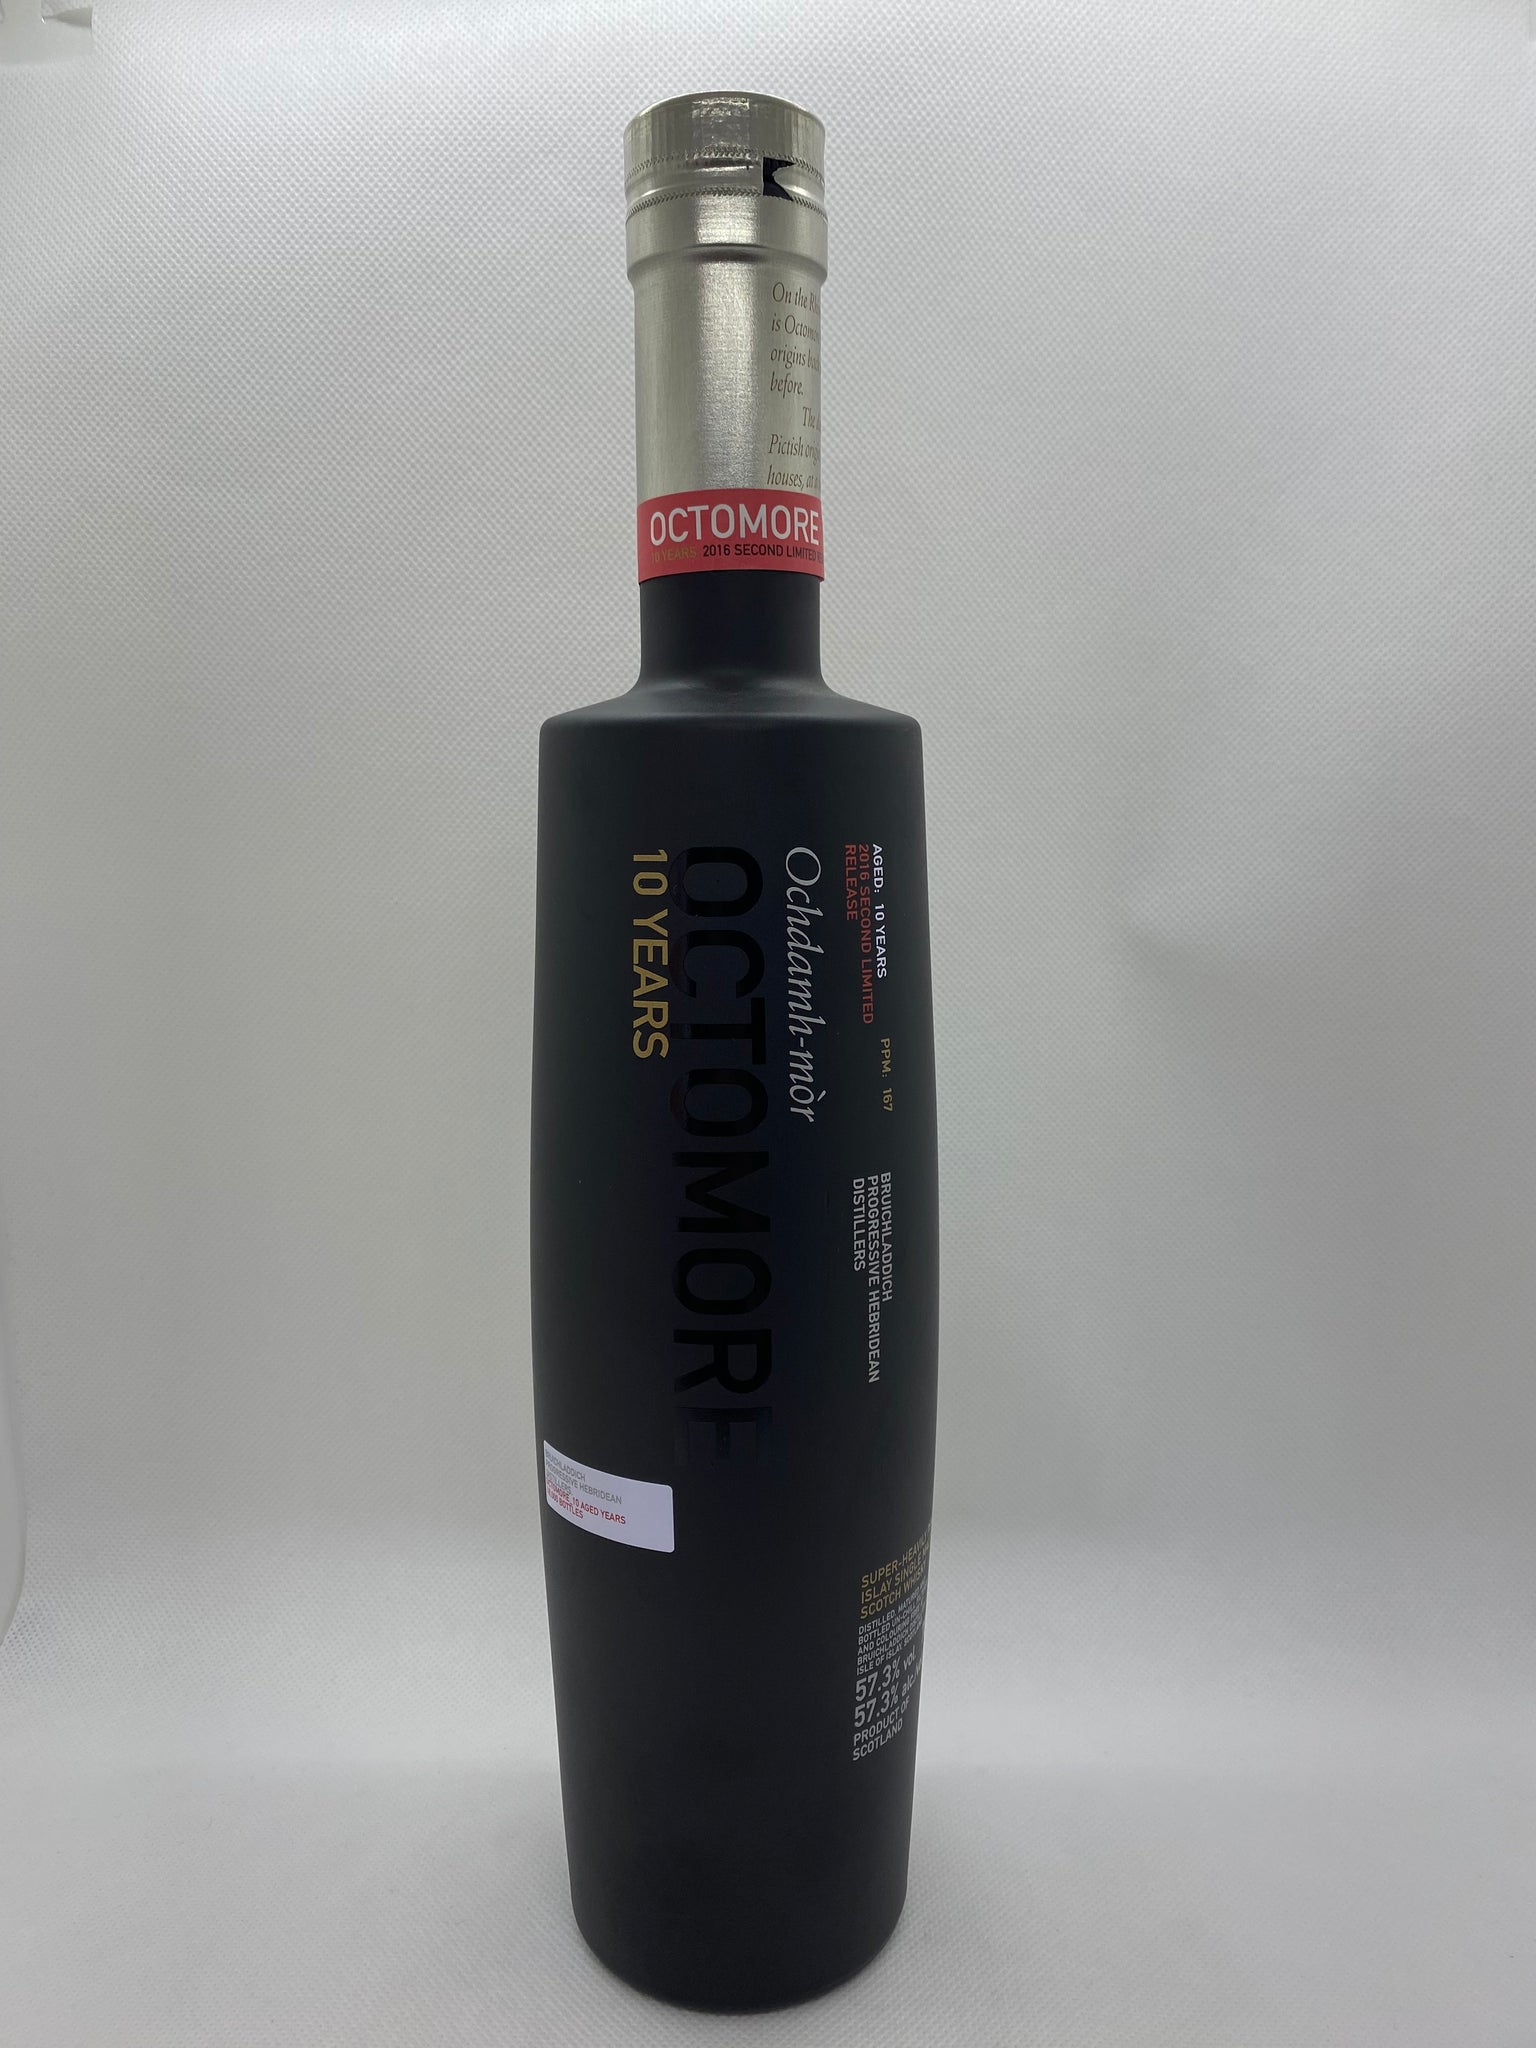 OCTOMORE 10 YEARS OLD 2ND EDITION 57.3% 167 ppm